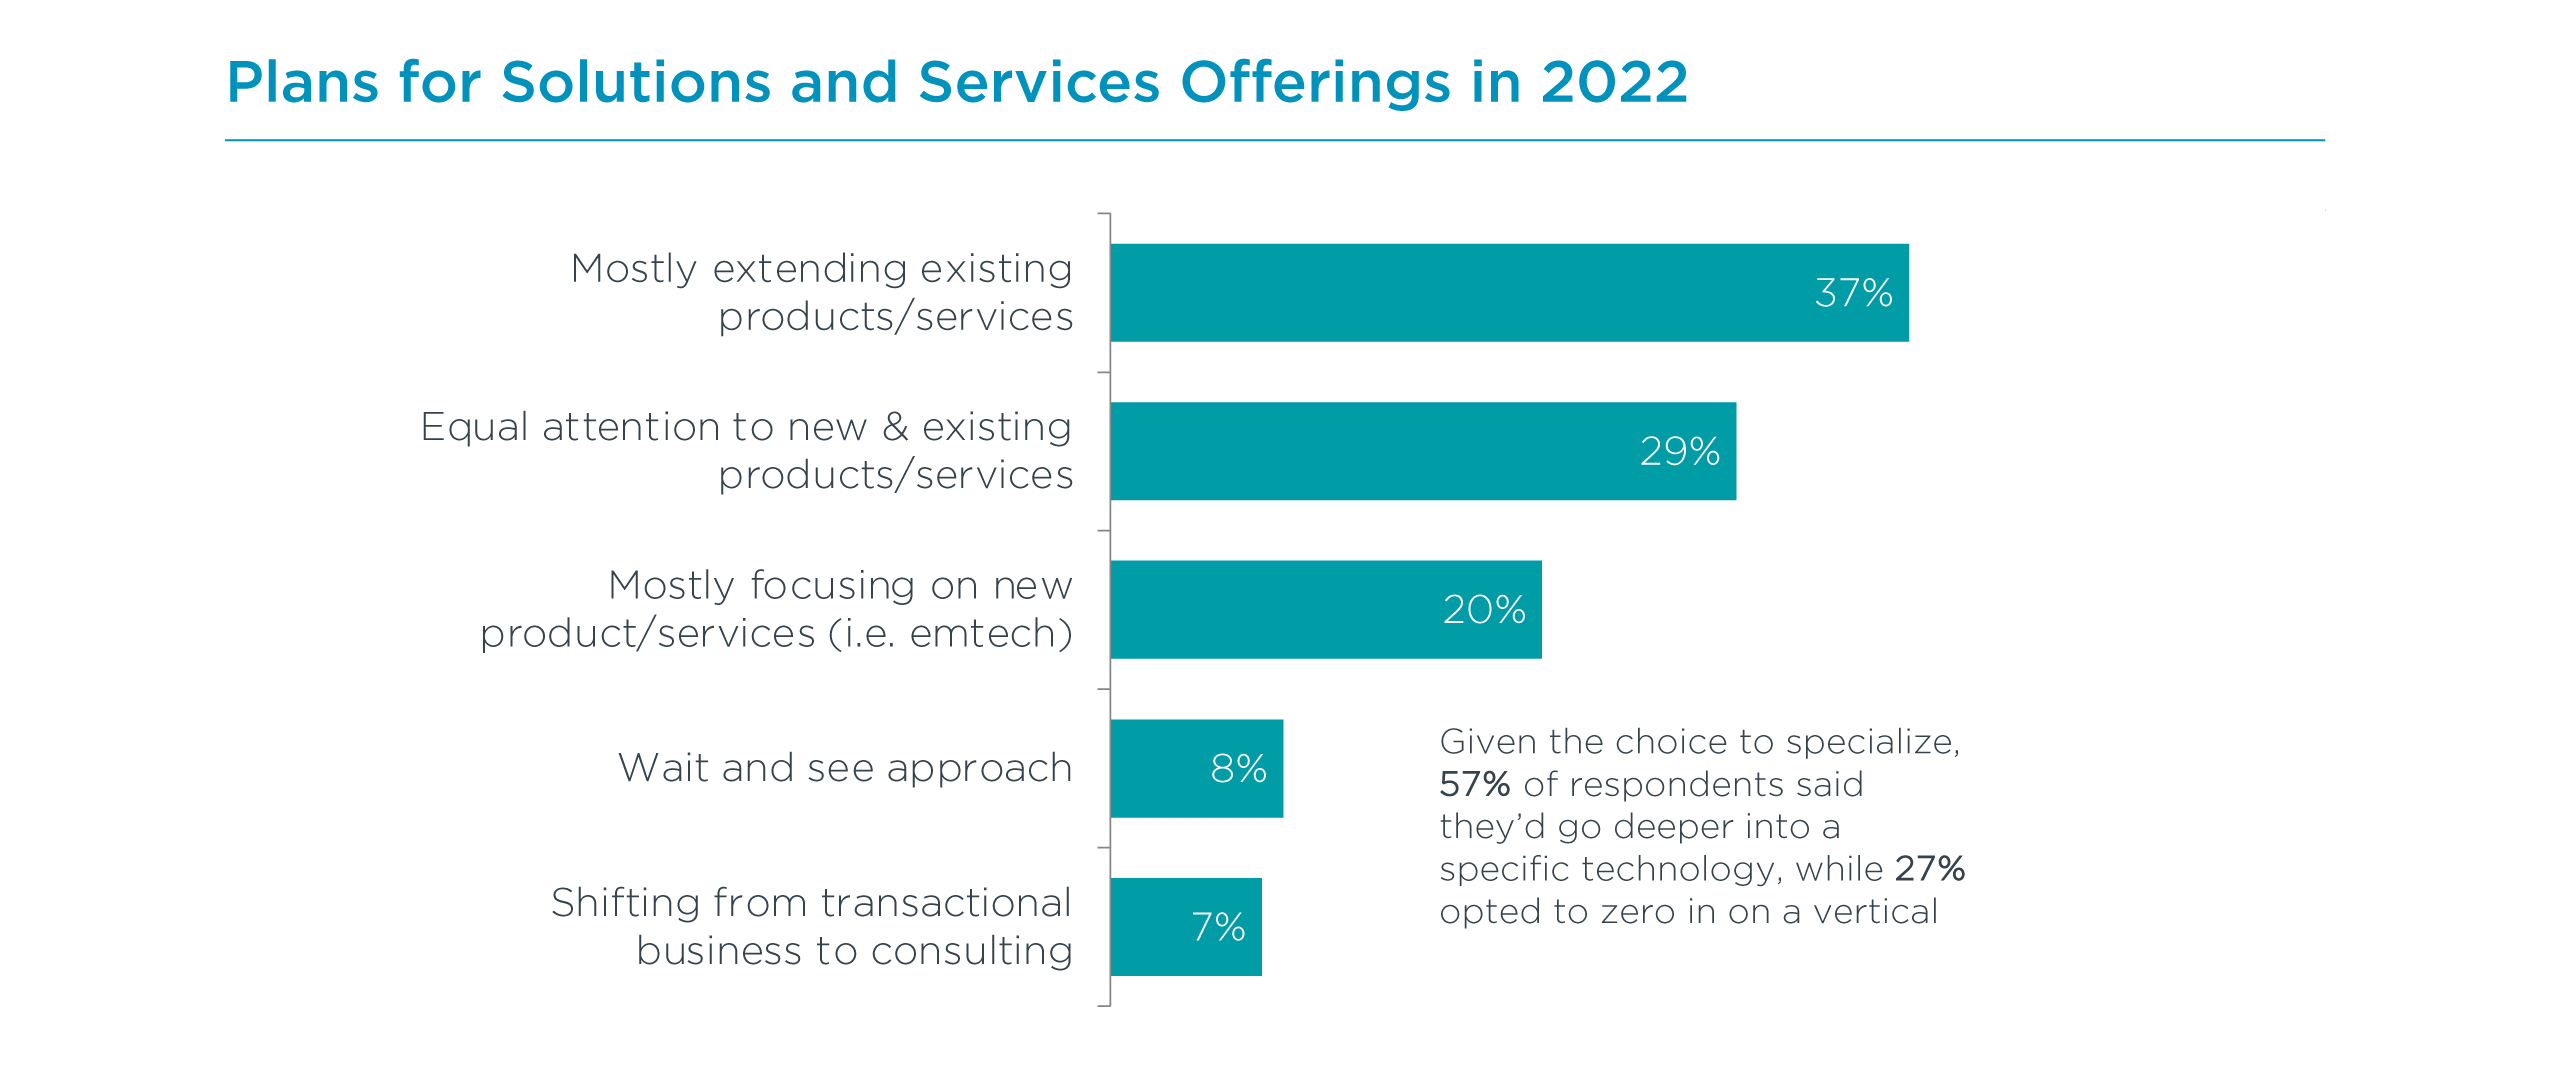 Plans for Solutions and Services Offerings in 2022